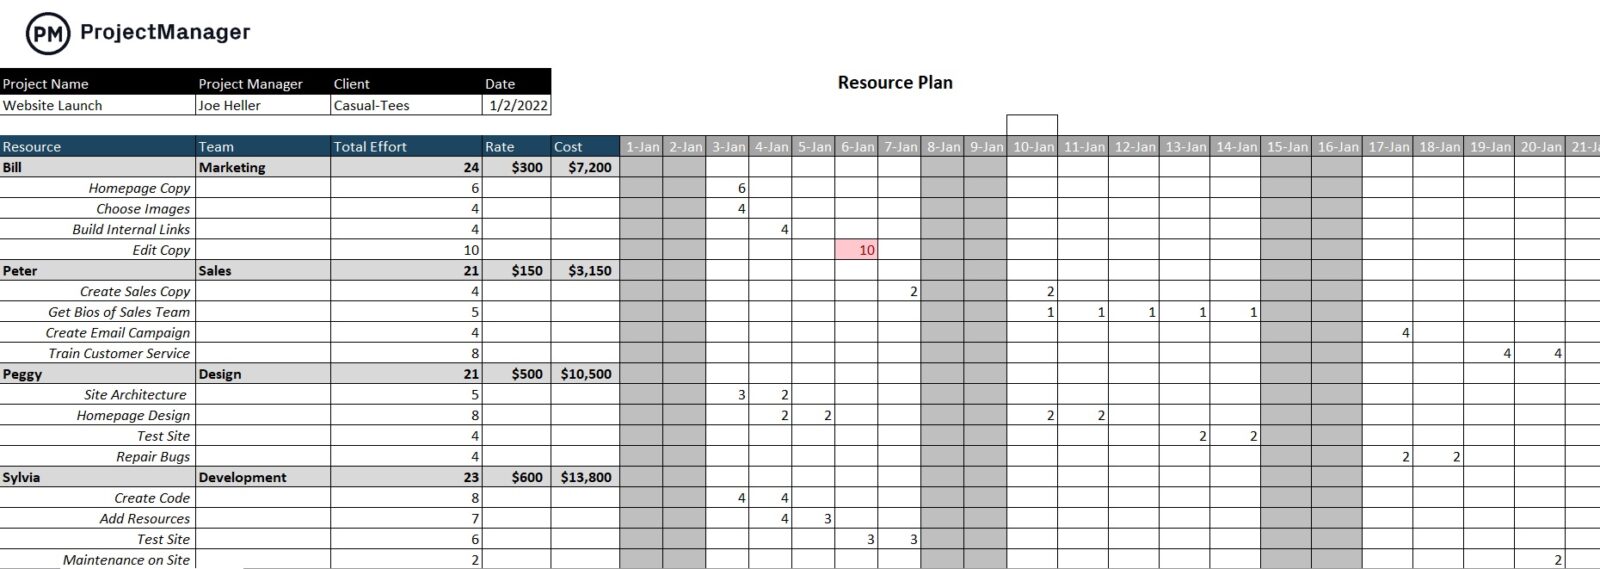 Resource plan template which helps PMOs allocate resources across projects